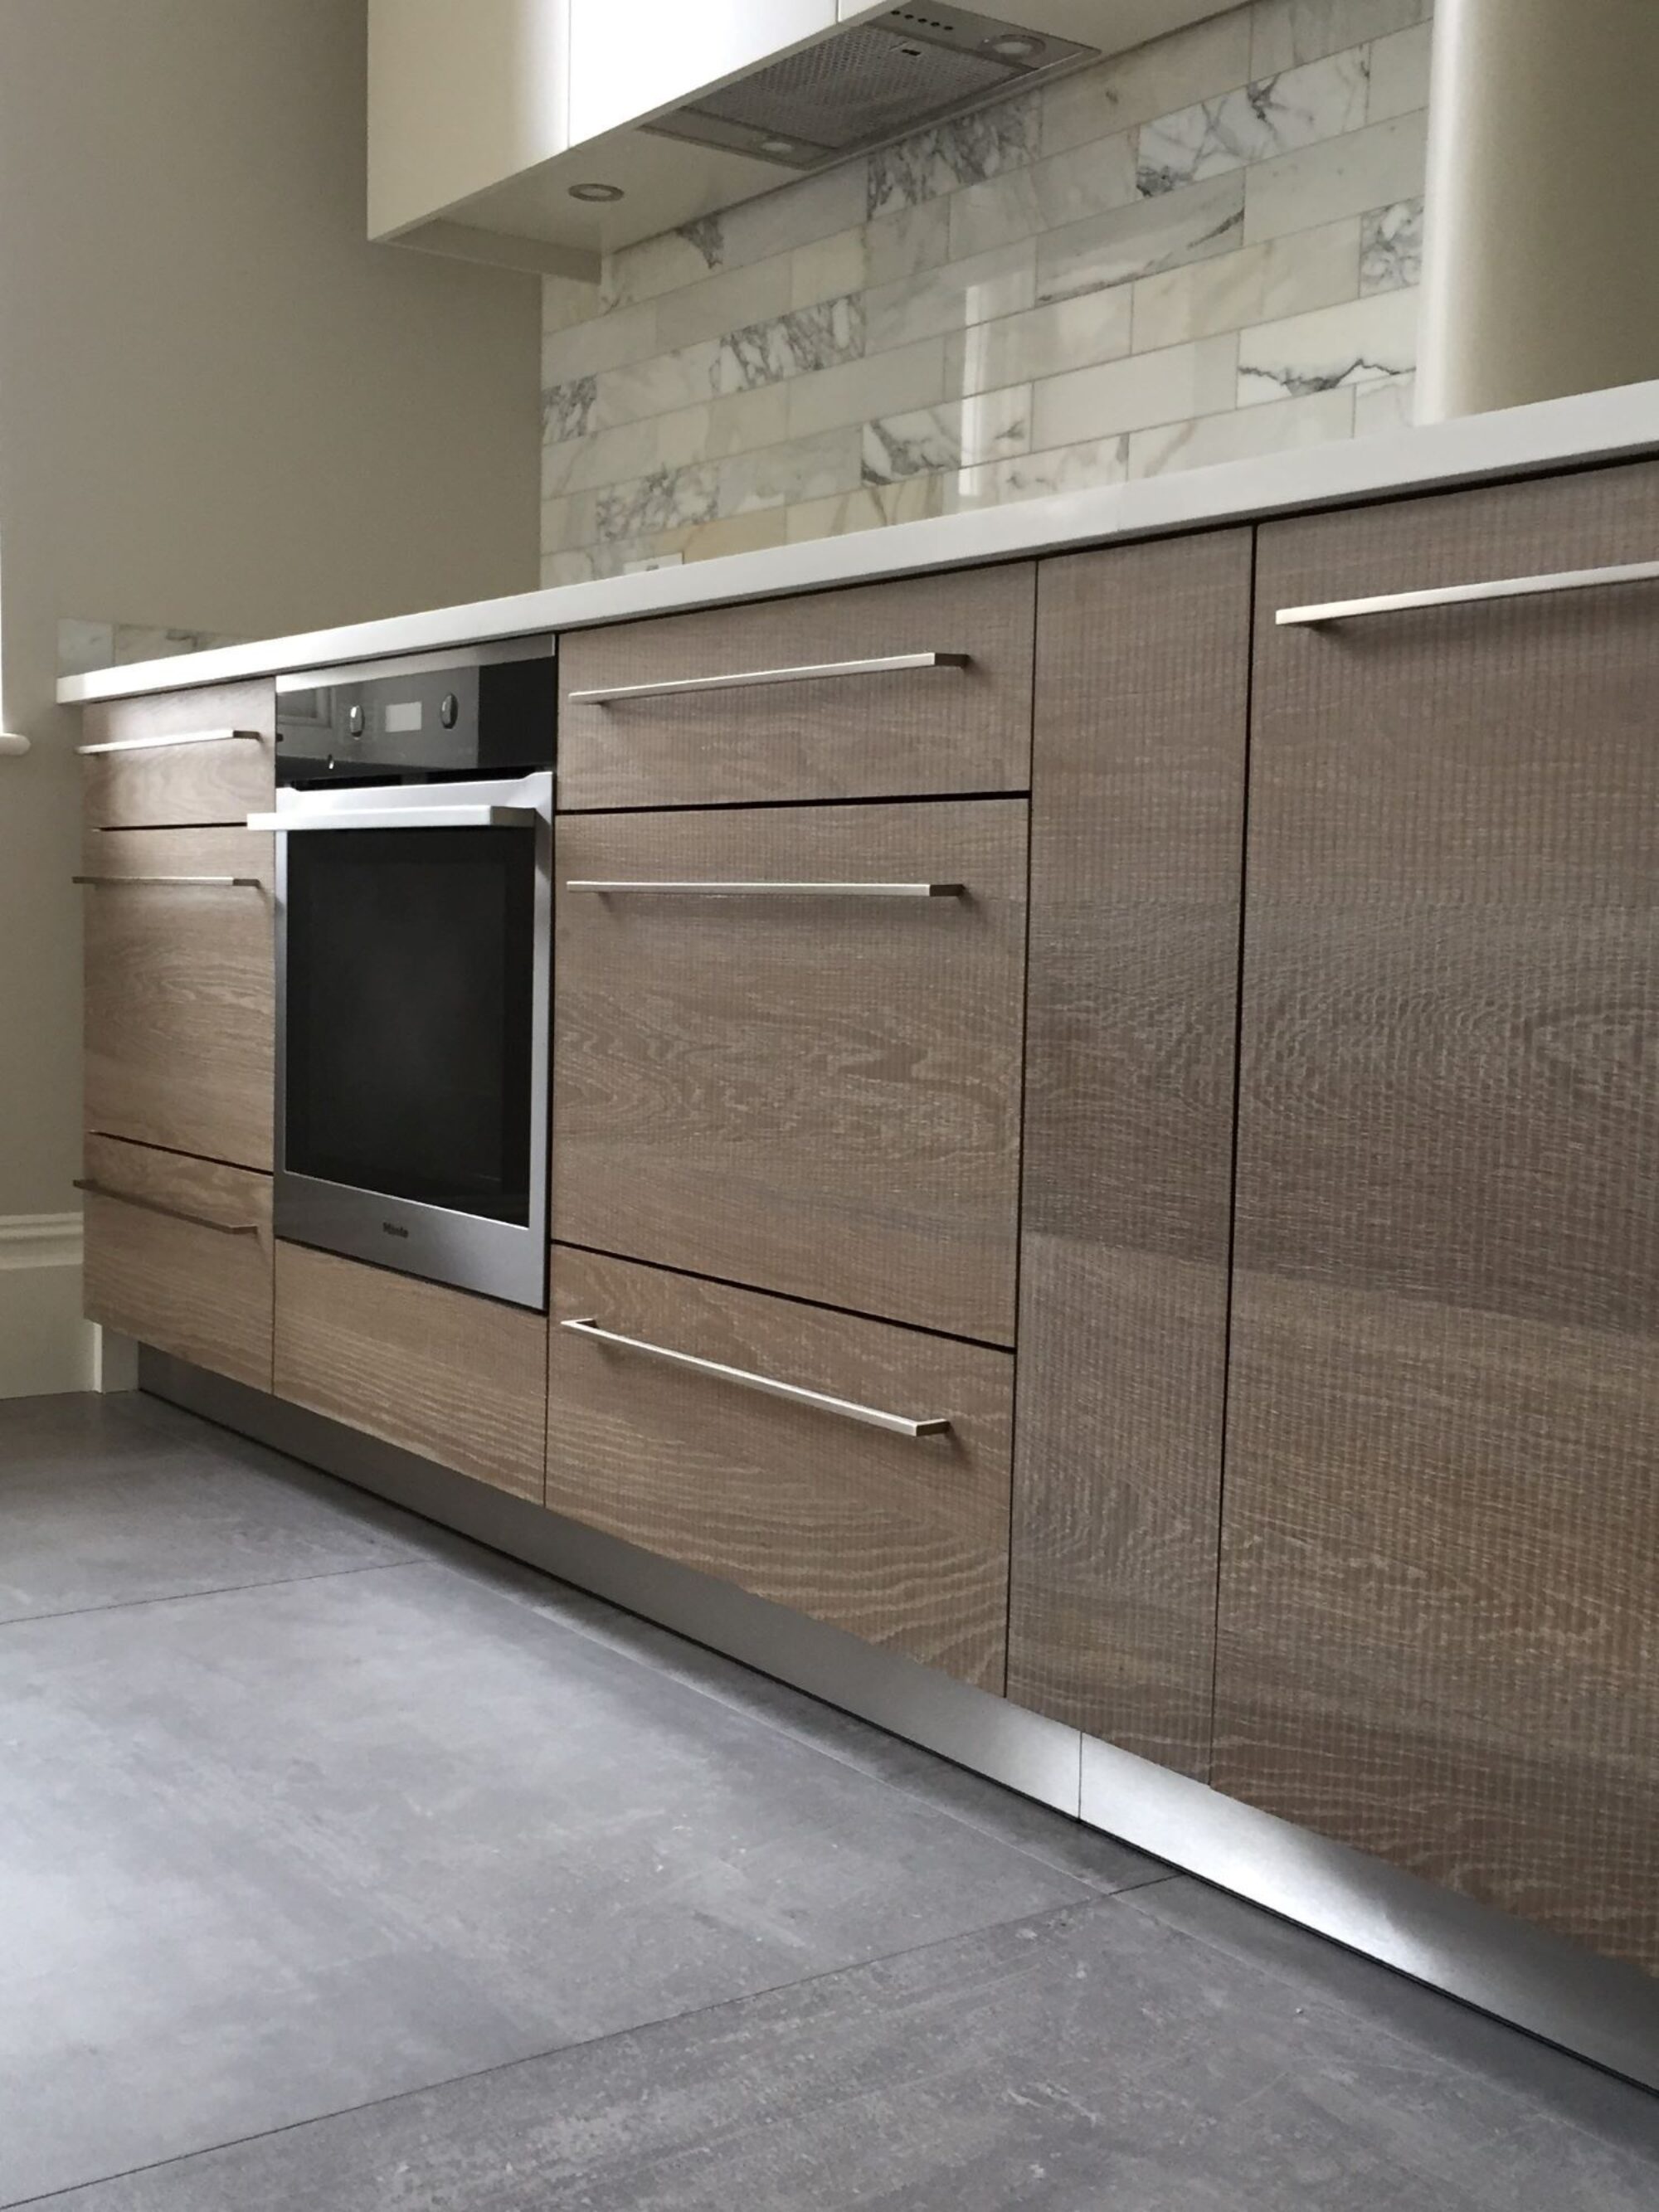 Textured oak tate bute on kitchen cabinetry